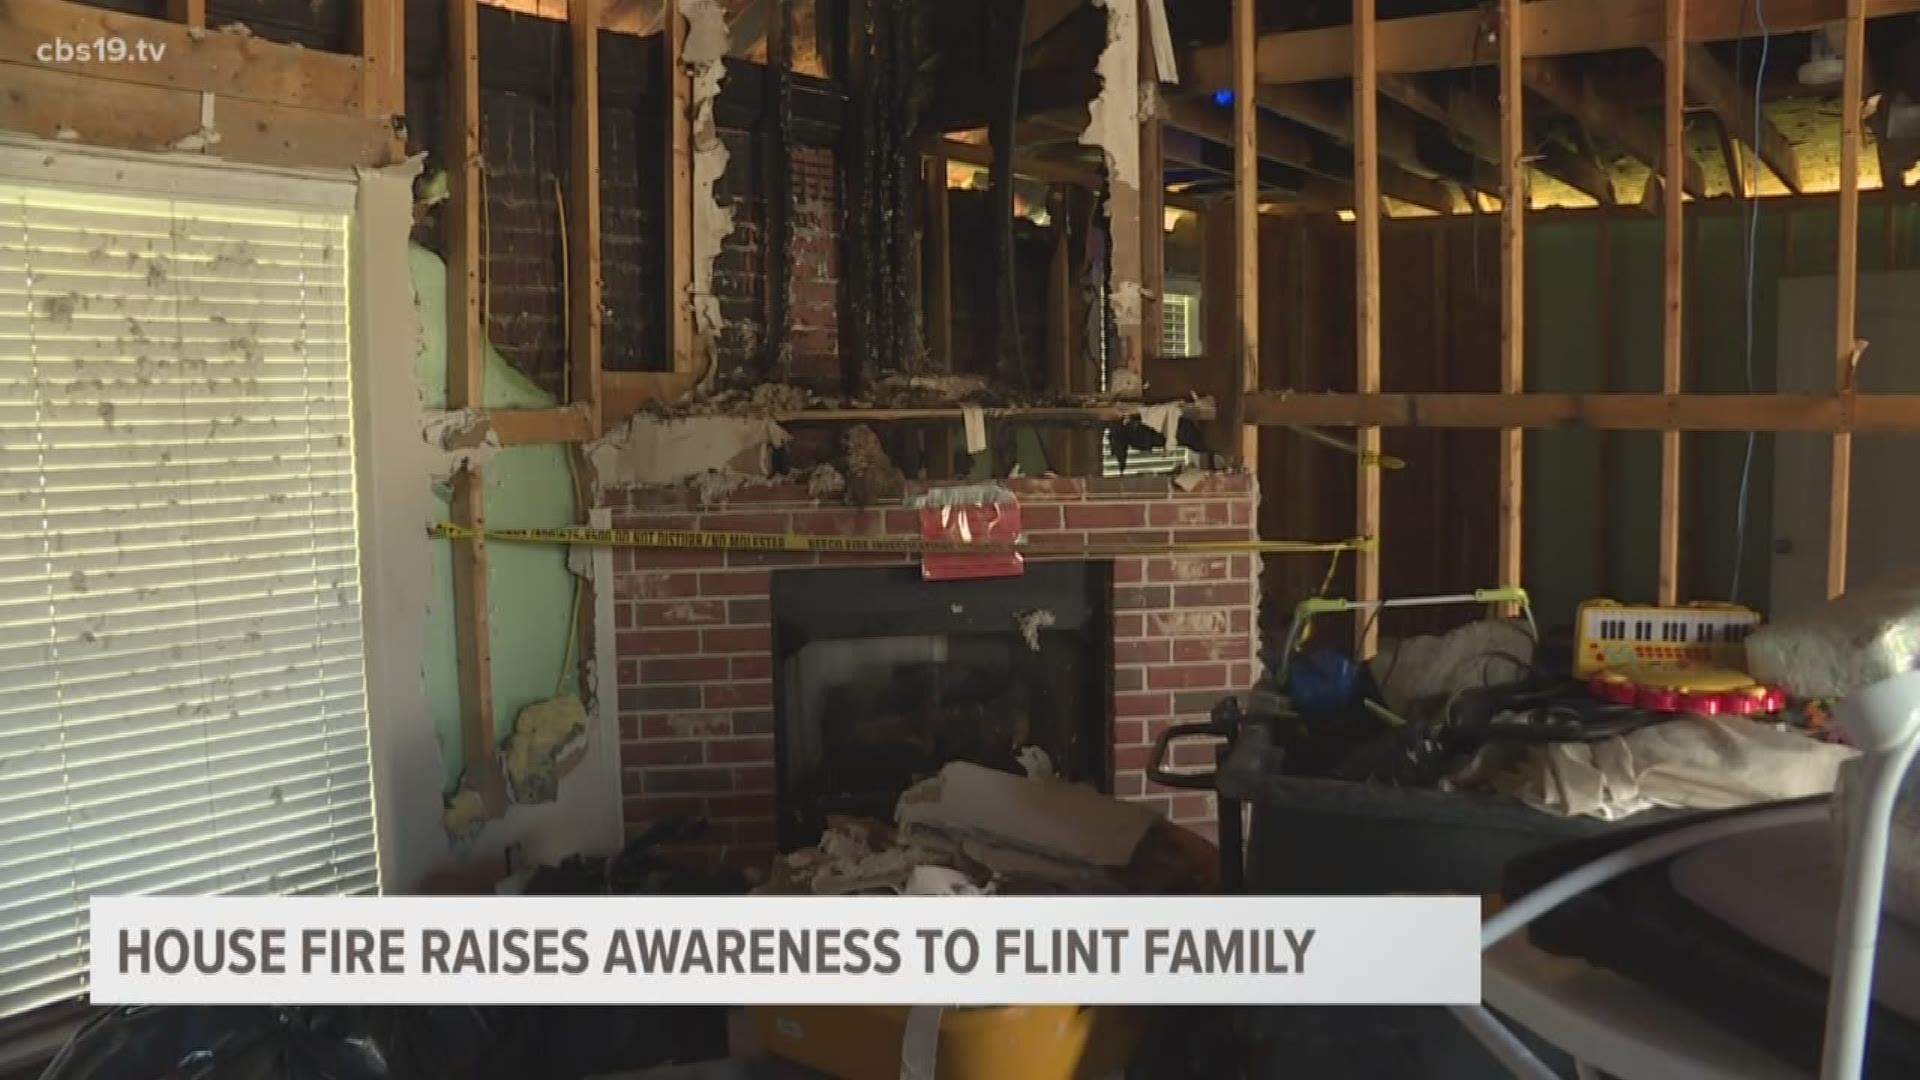 The Conrado's home in Flint was struck by lightening on May 18. The fire destroyed most of the structure. The Conrados want others to heed their warning.